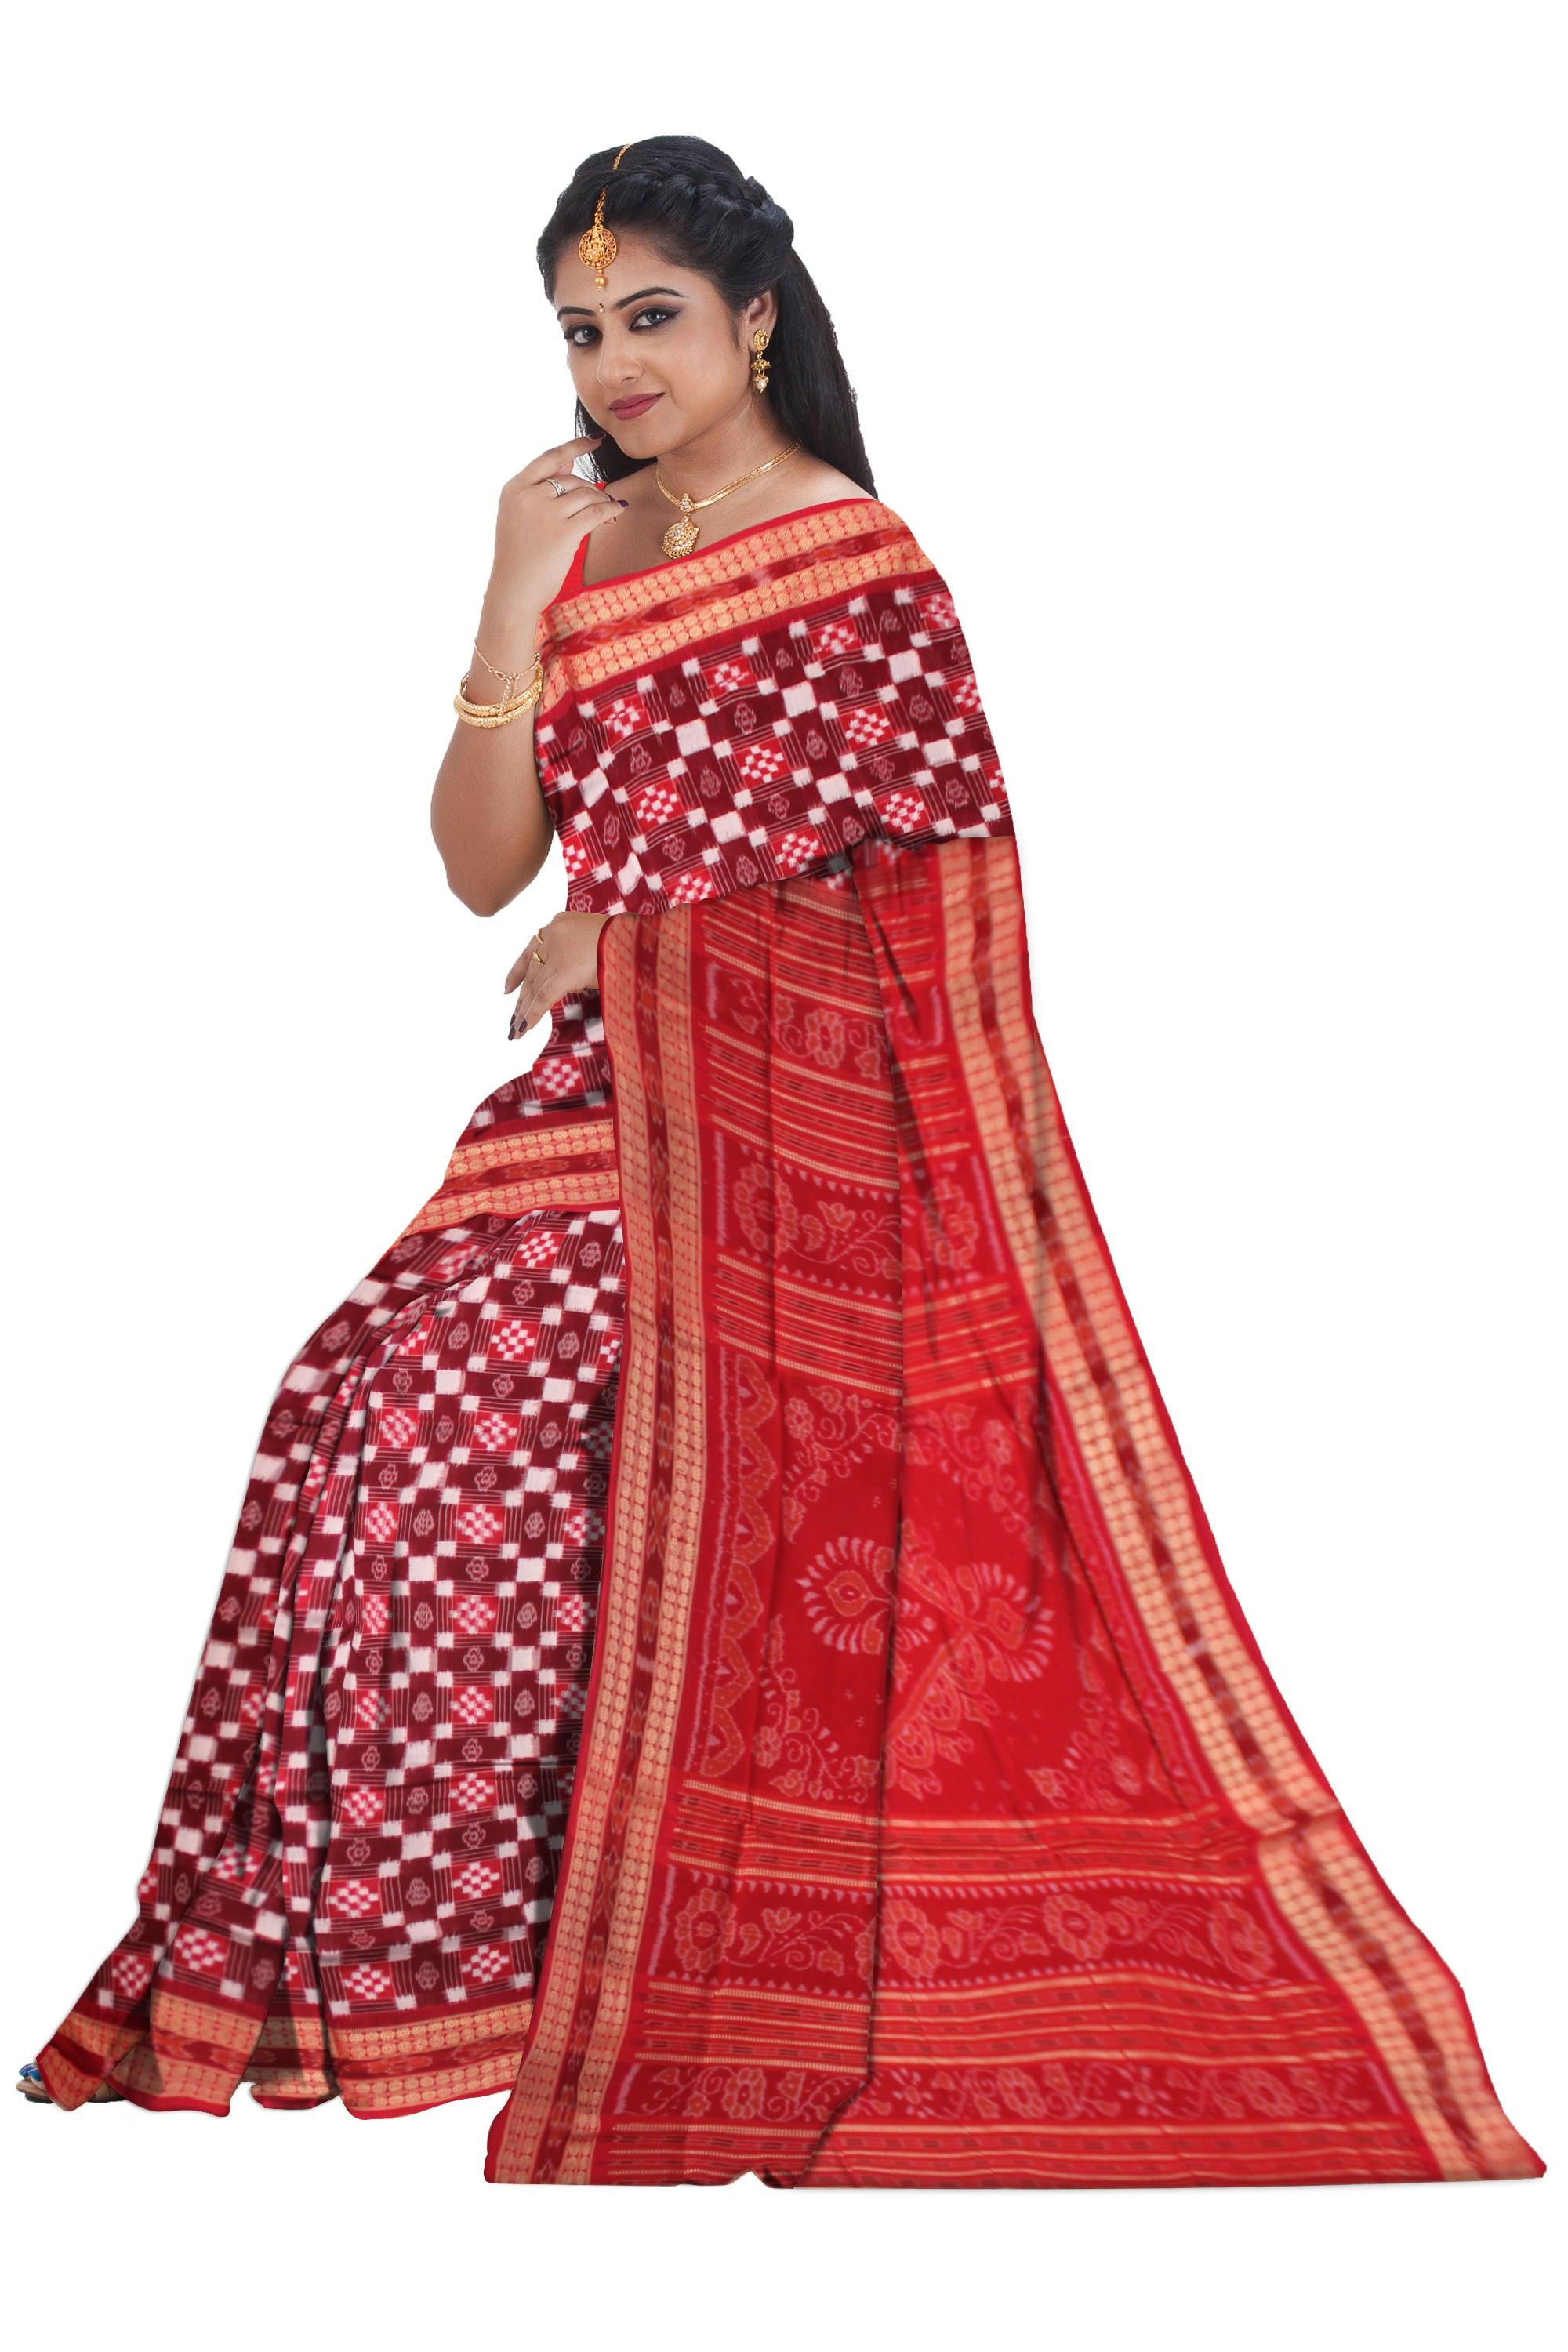 SONEPUR PASAPALI DESIGN COTTON SAREE IN RED AND MAROON COLOR, WITH BLOUSE PIECE. - Koshali Arts & Crafts Enterprise